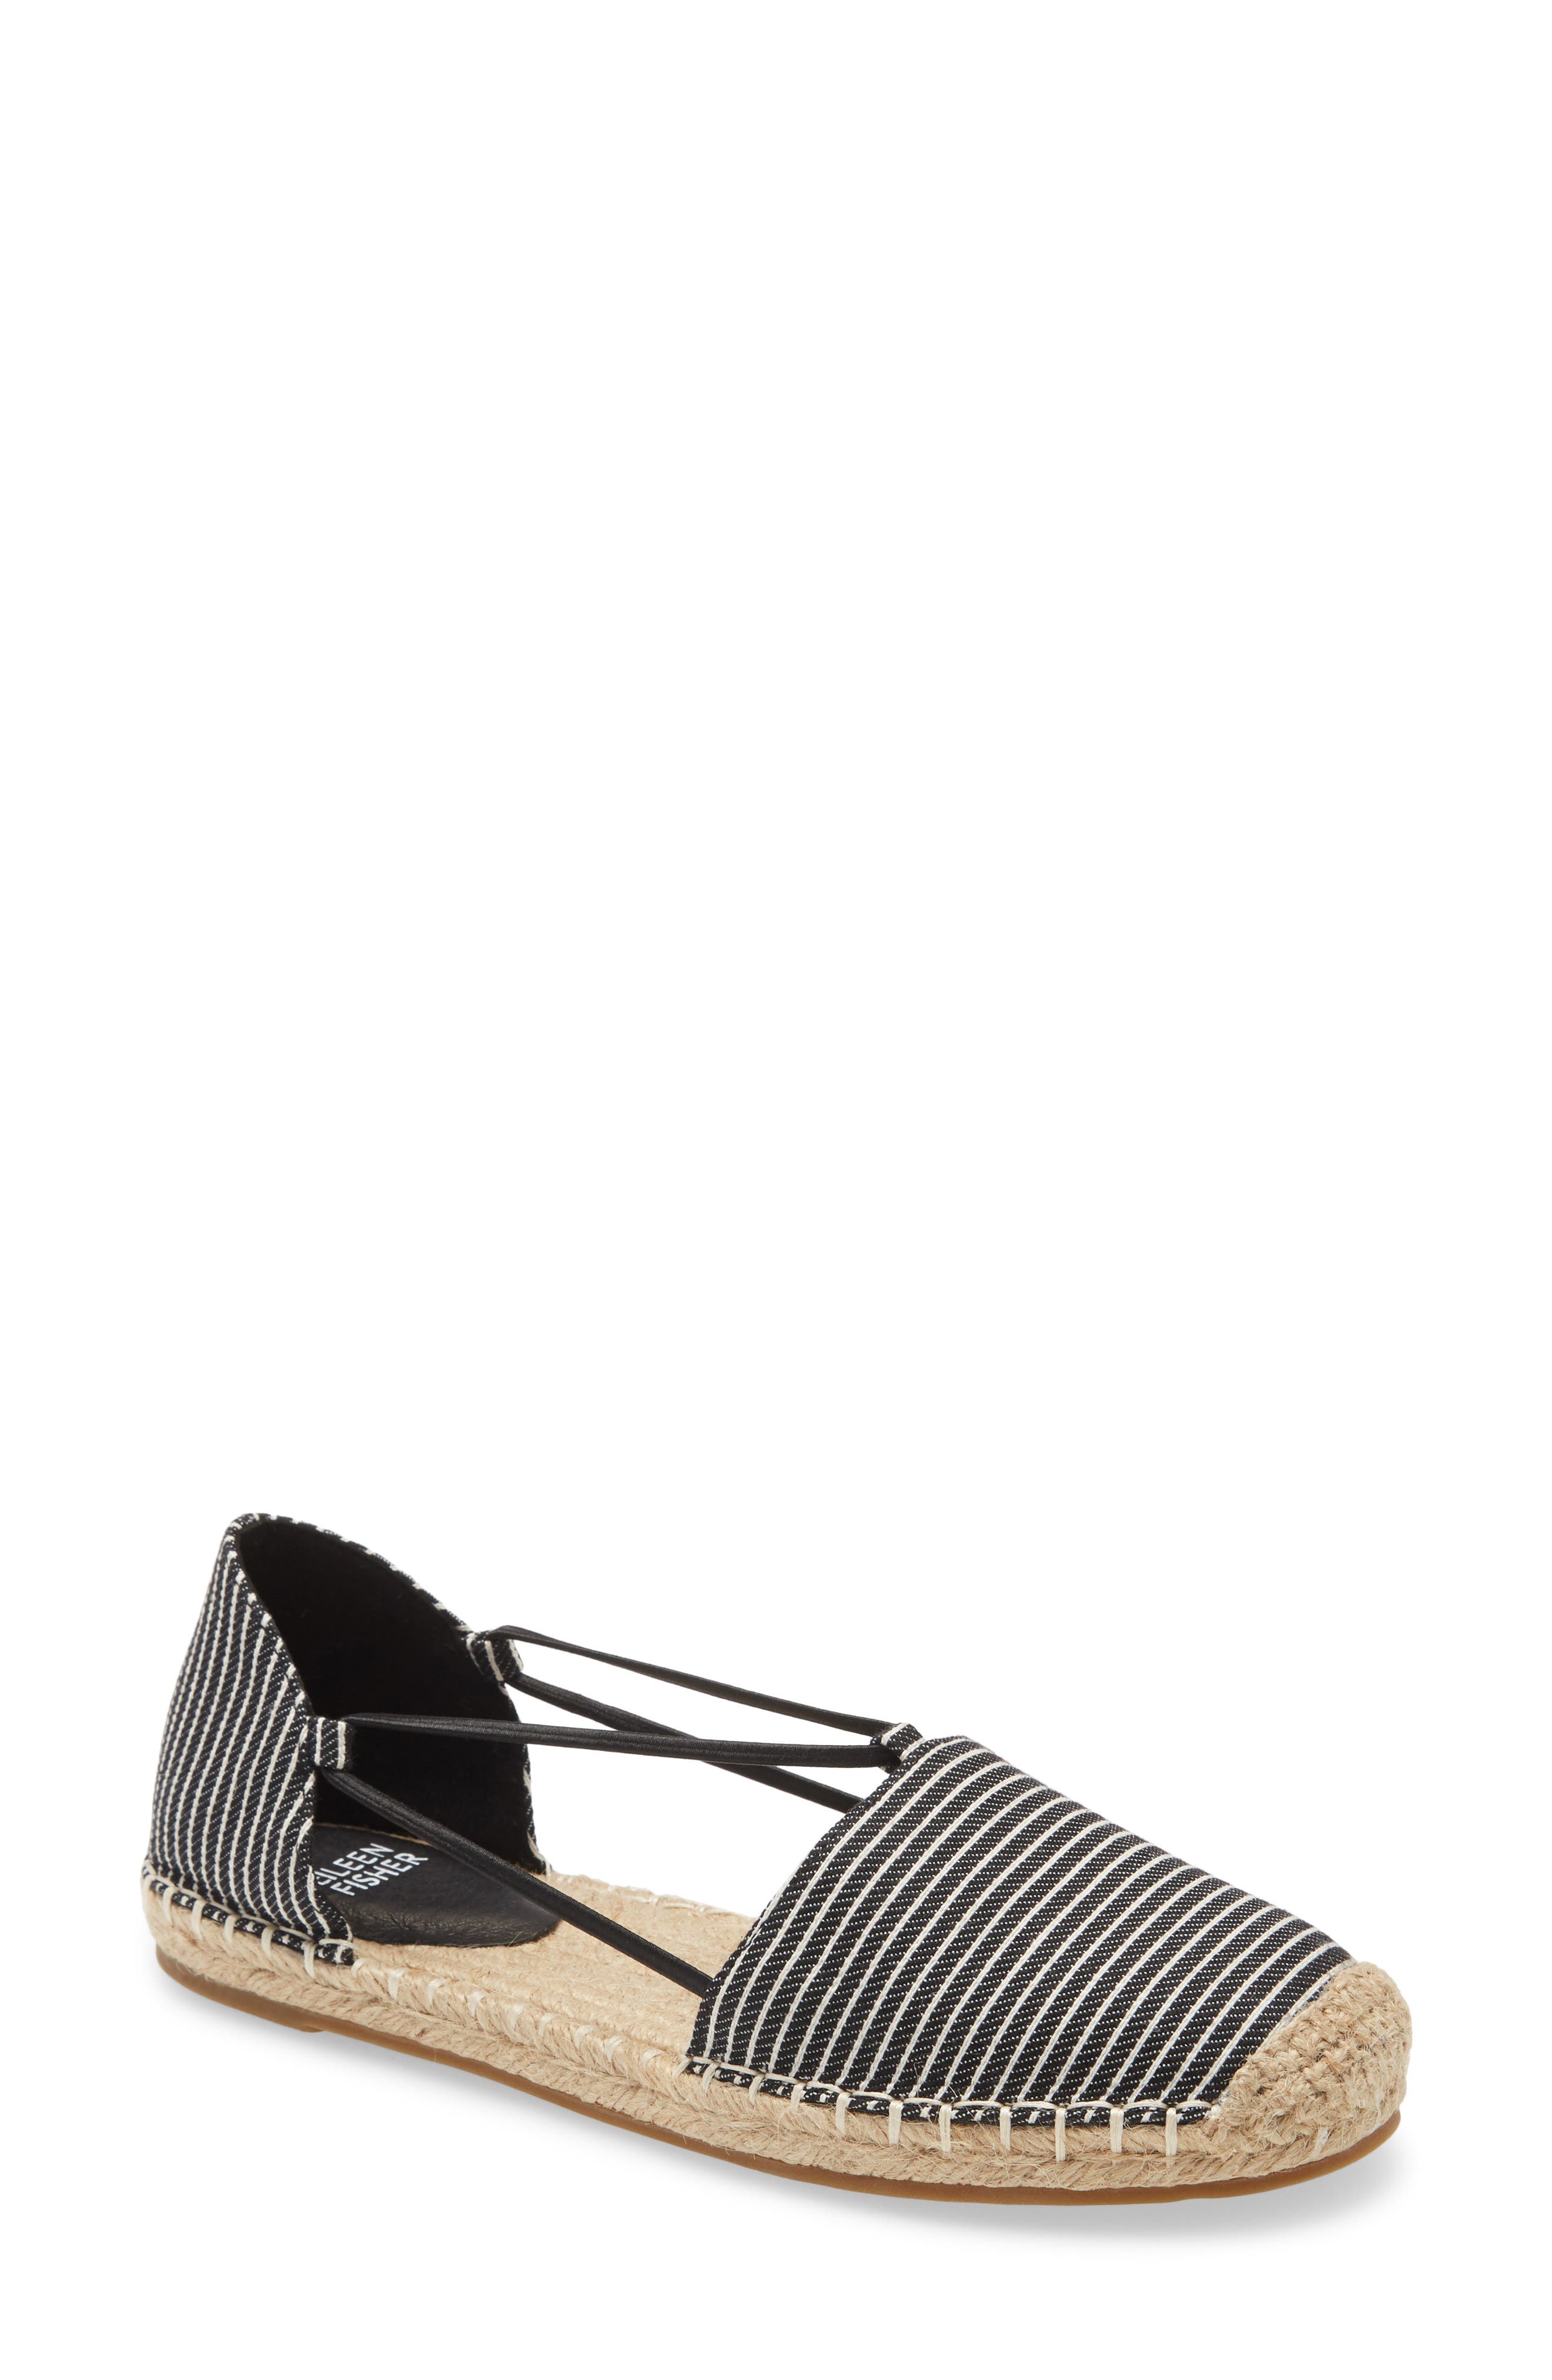 eileen fisher lace espadrille